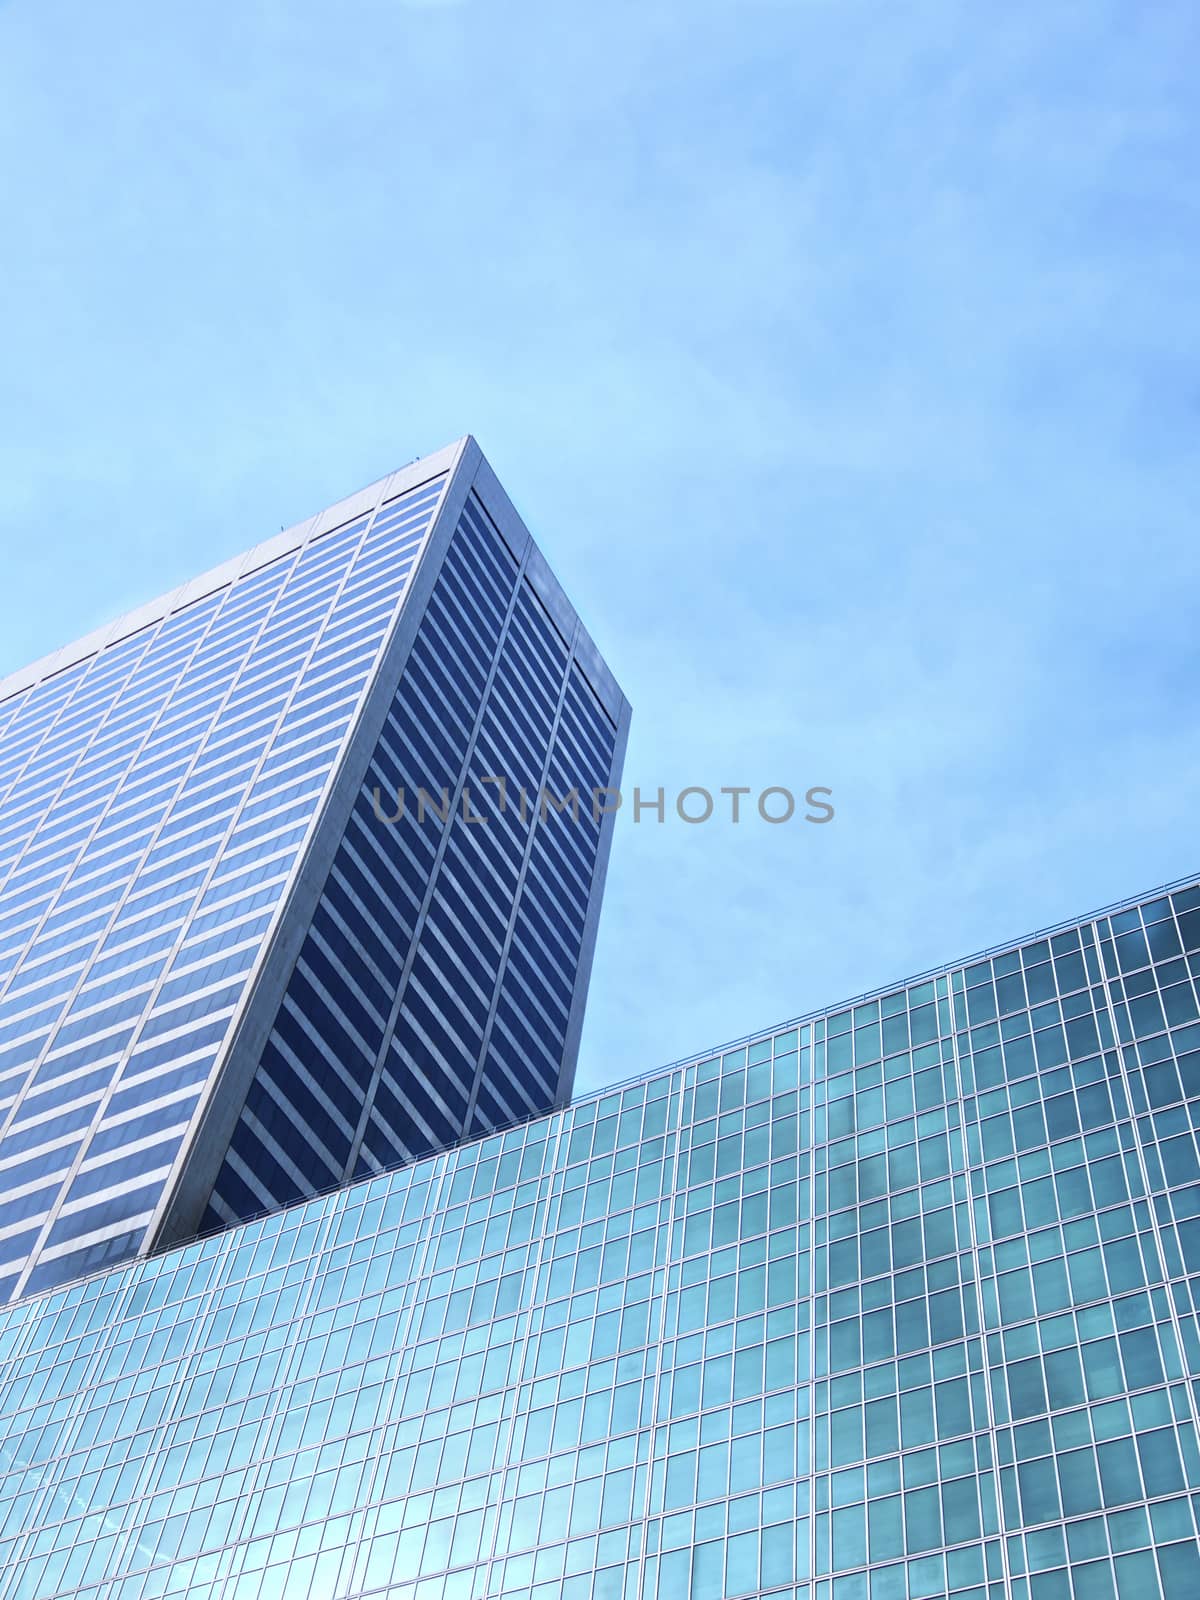 Business, Architecture in New York City, USA